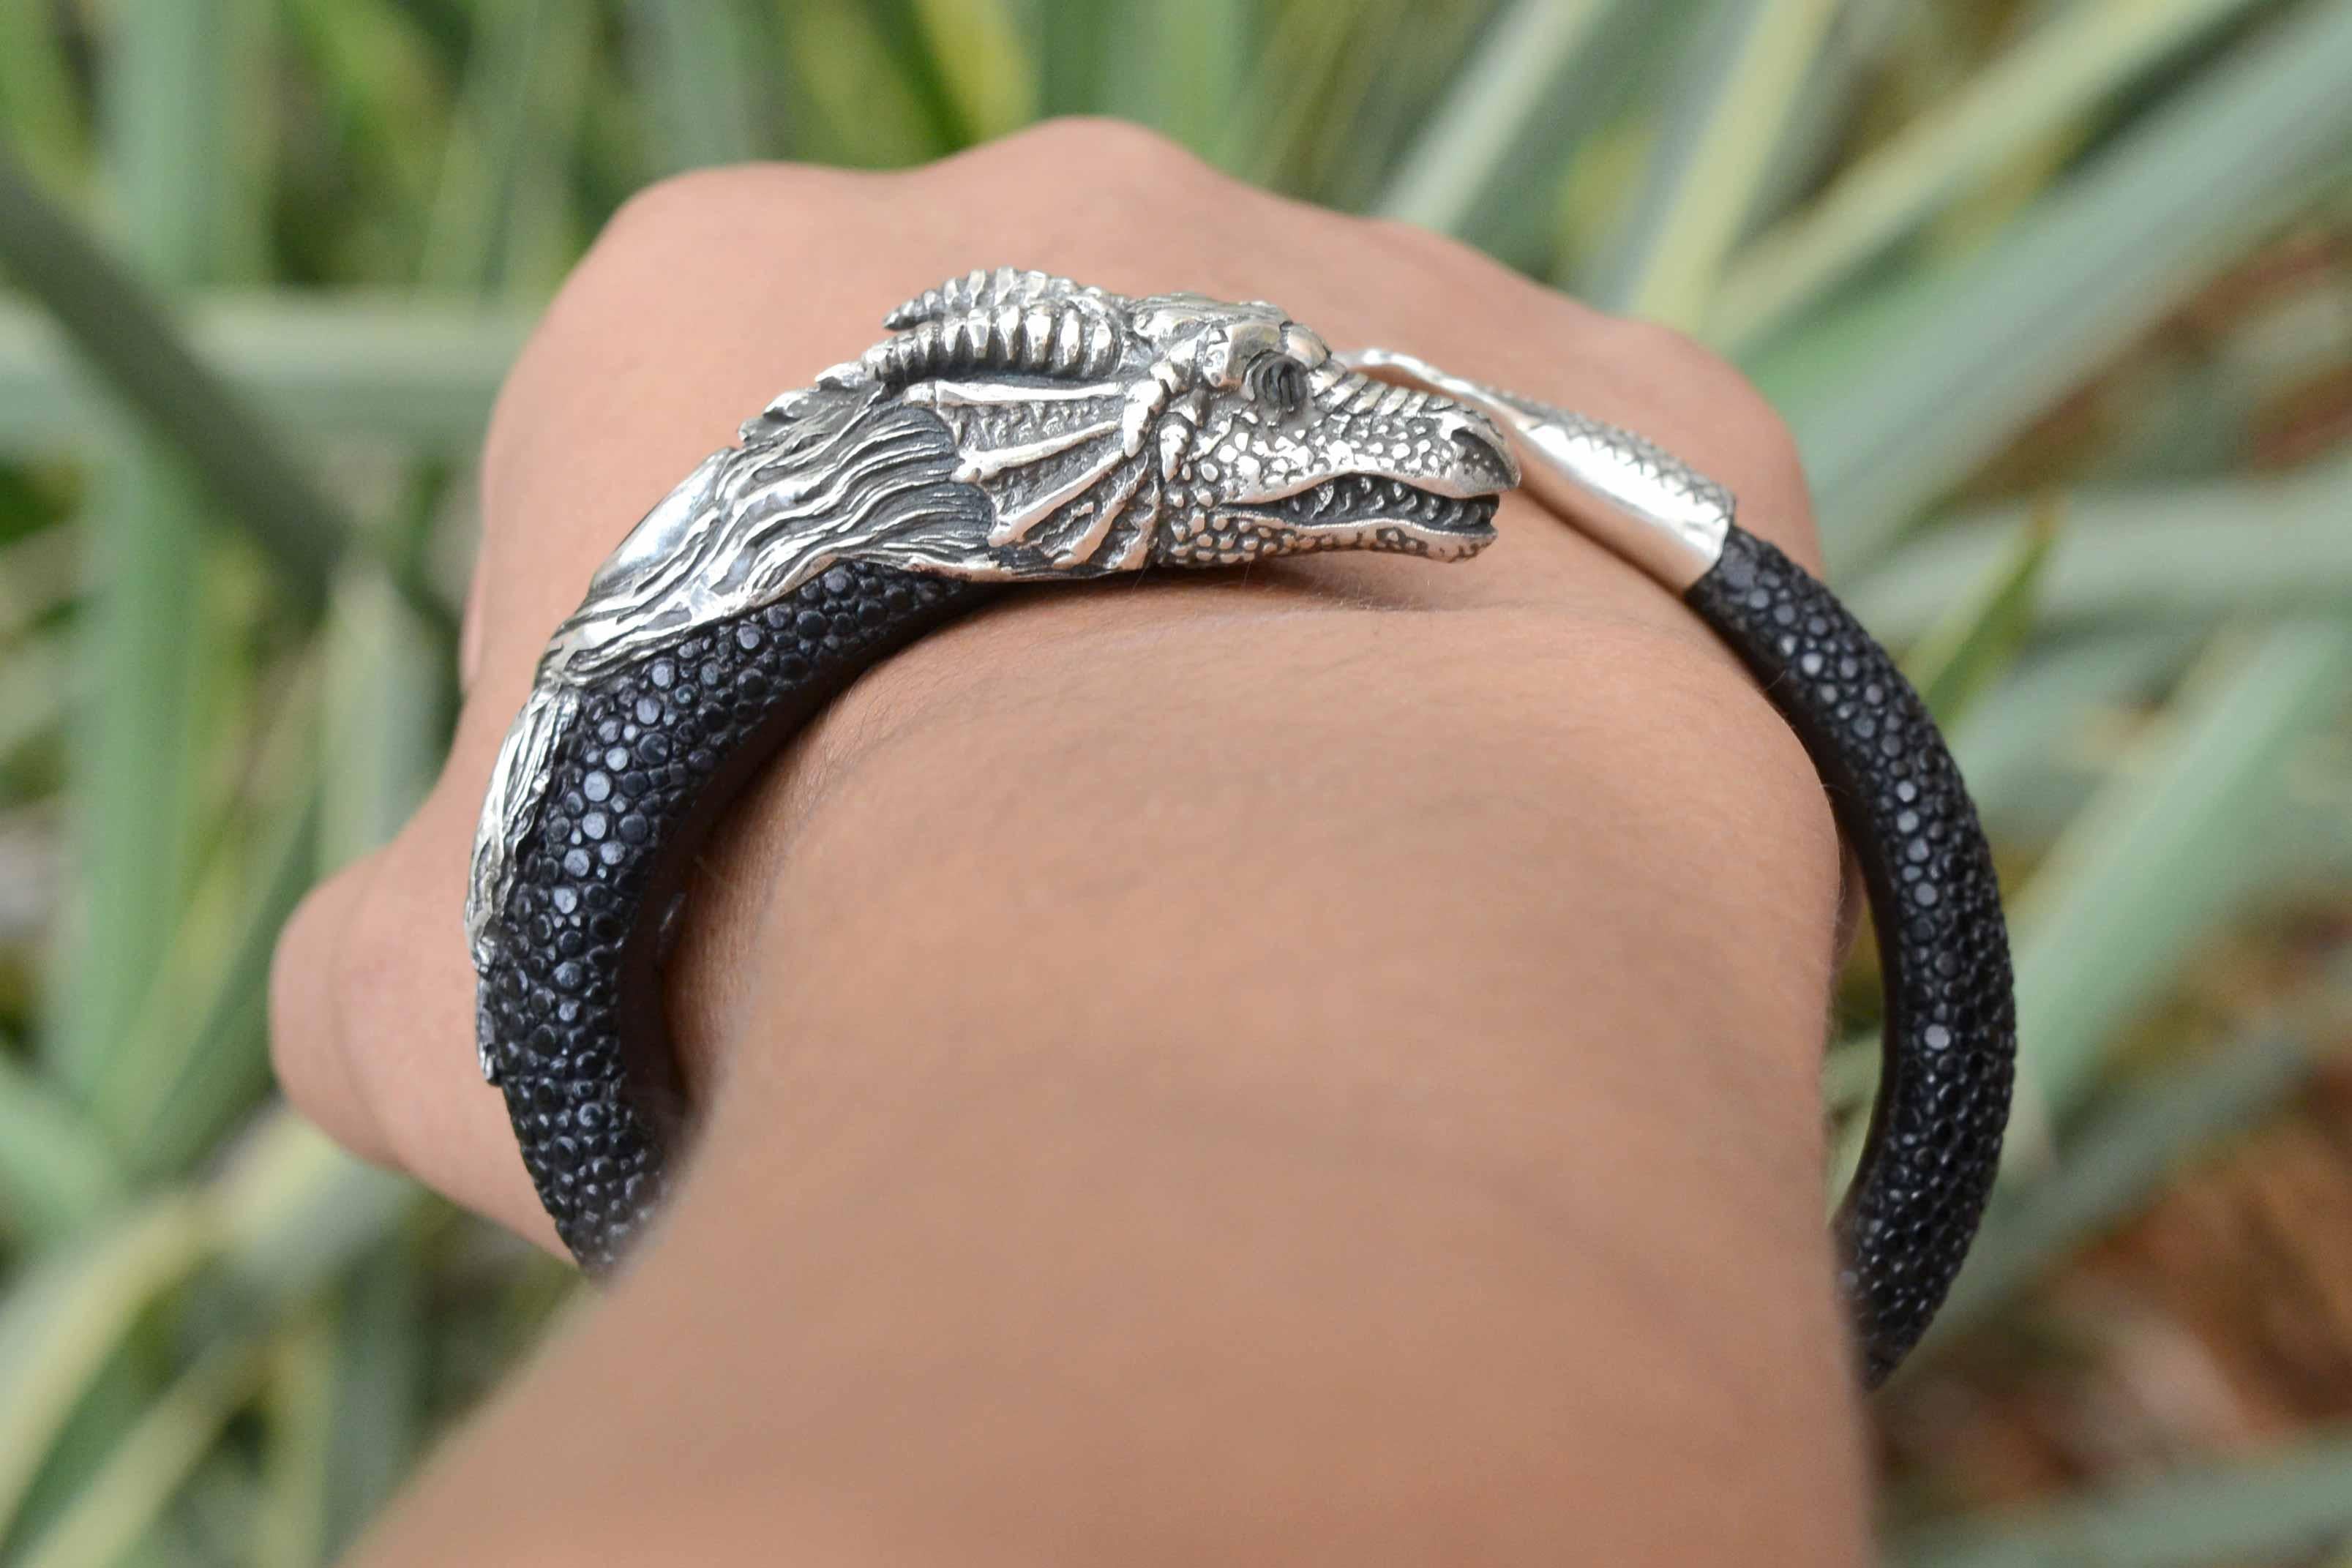 If you're a fan of Game of Thrones, you'll love this fantastic dragon bracelet. Resembling the infamous Rhaegal, Viserion or Drogon, this sterling silver arm cuff bangle is wrapped in exotic, sustainable stingray shagreen and has that GOT Medieval,